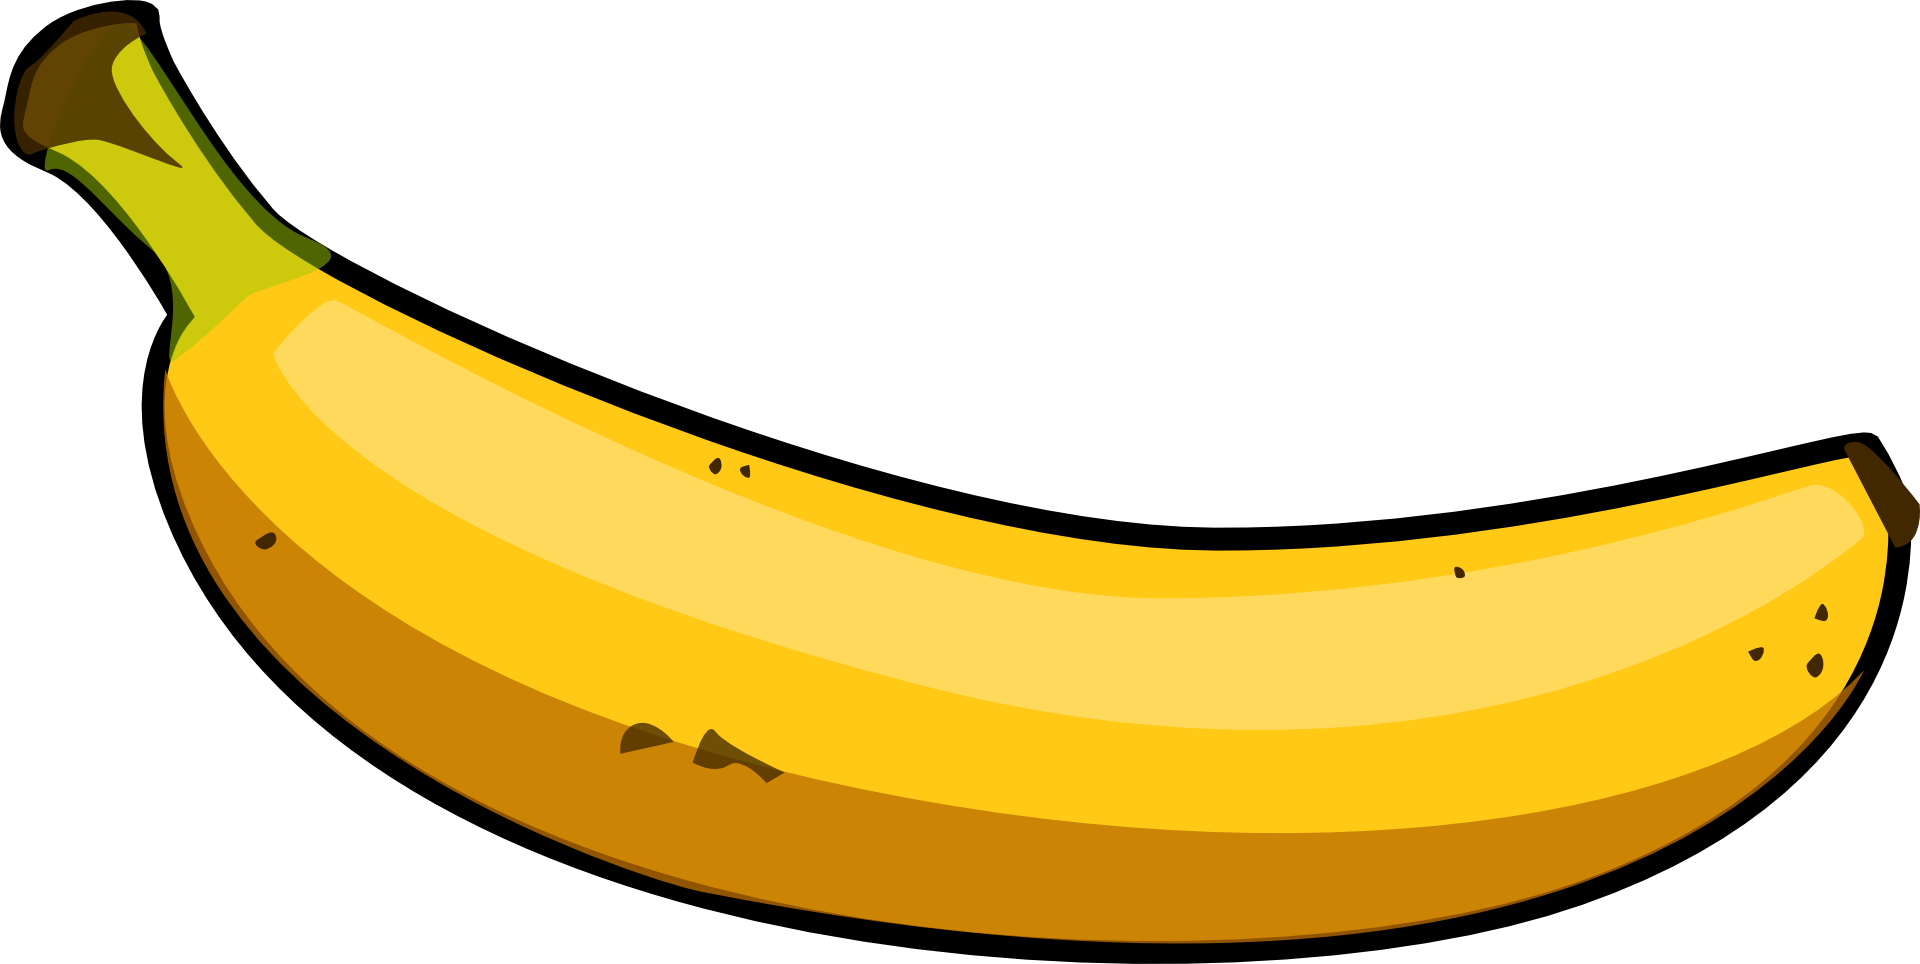 Fruit banana images in hd clipart